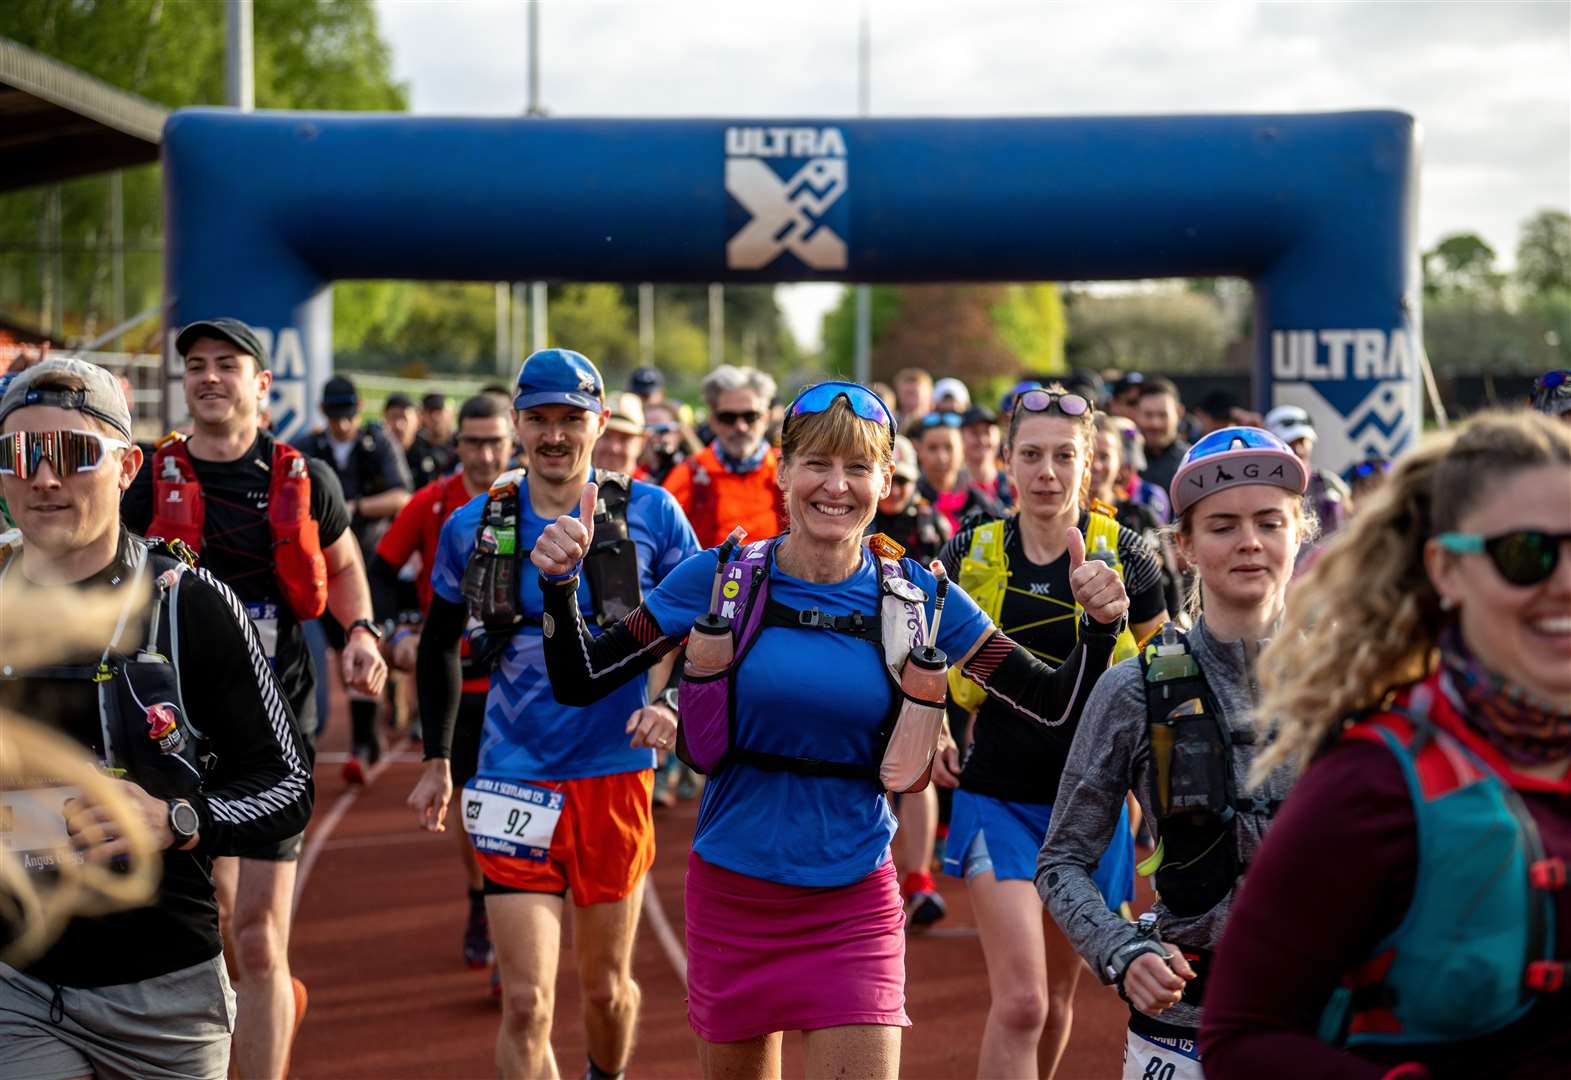 Race around Loch Ness aiming high as Ultra X Scotland set to return to Inverness